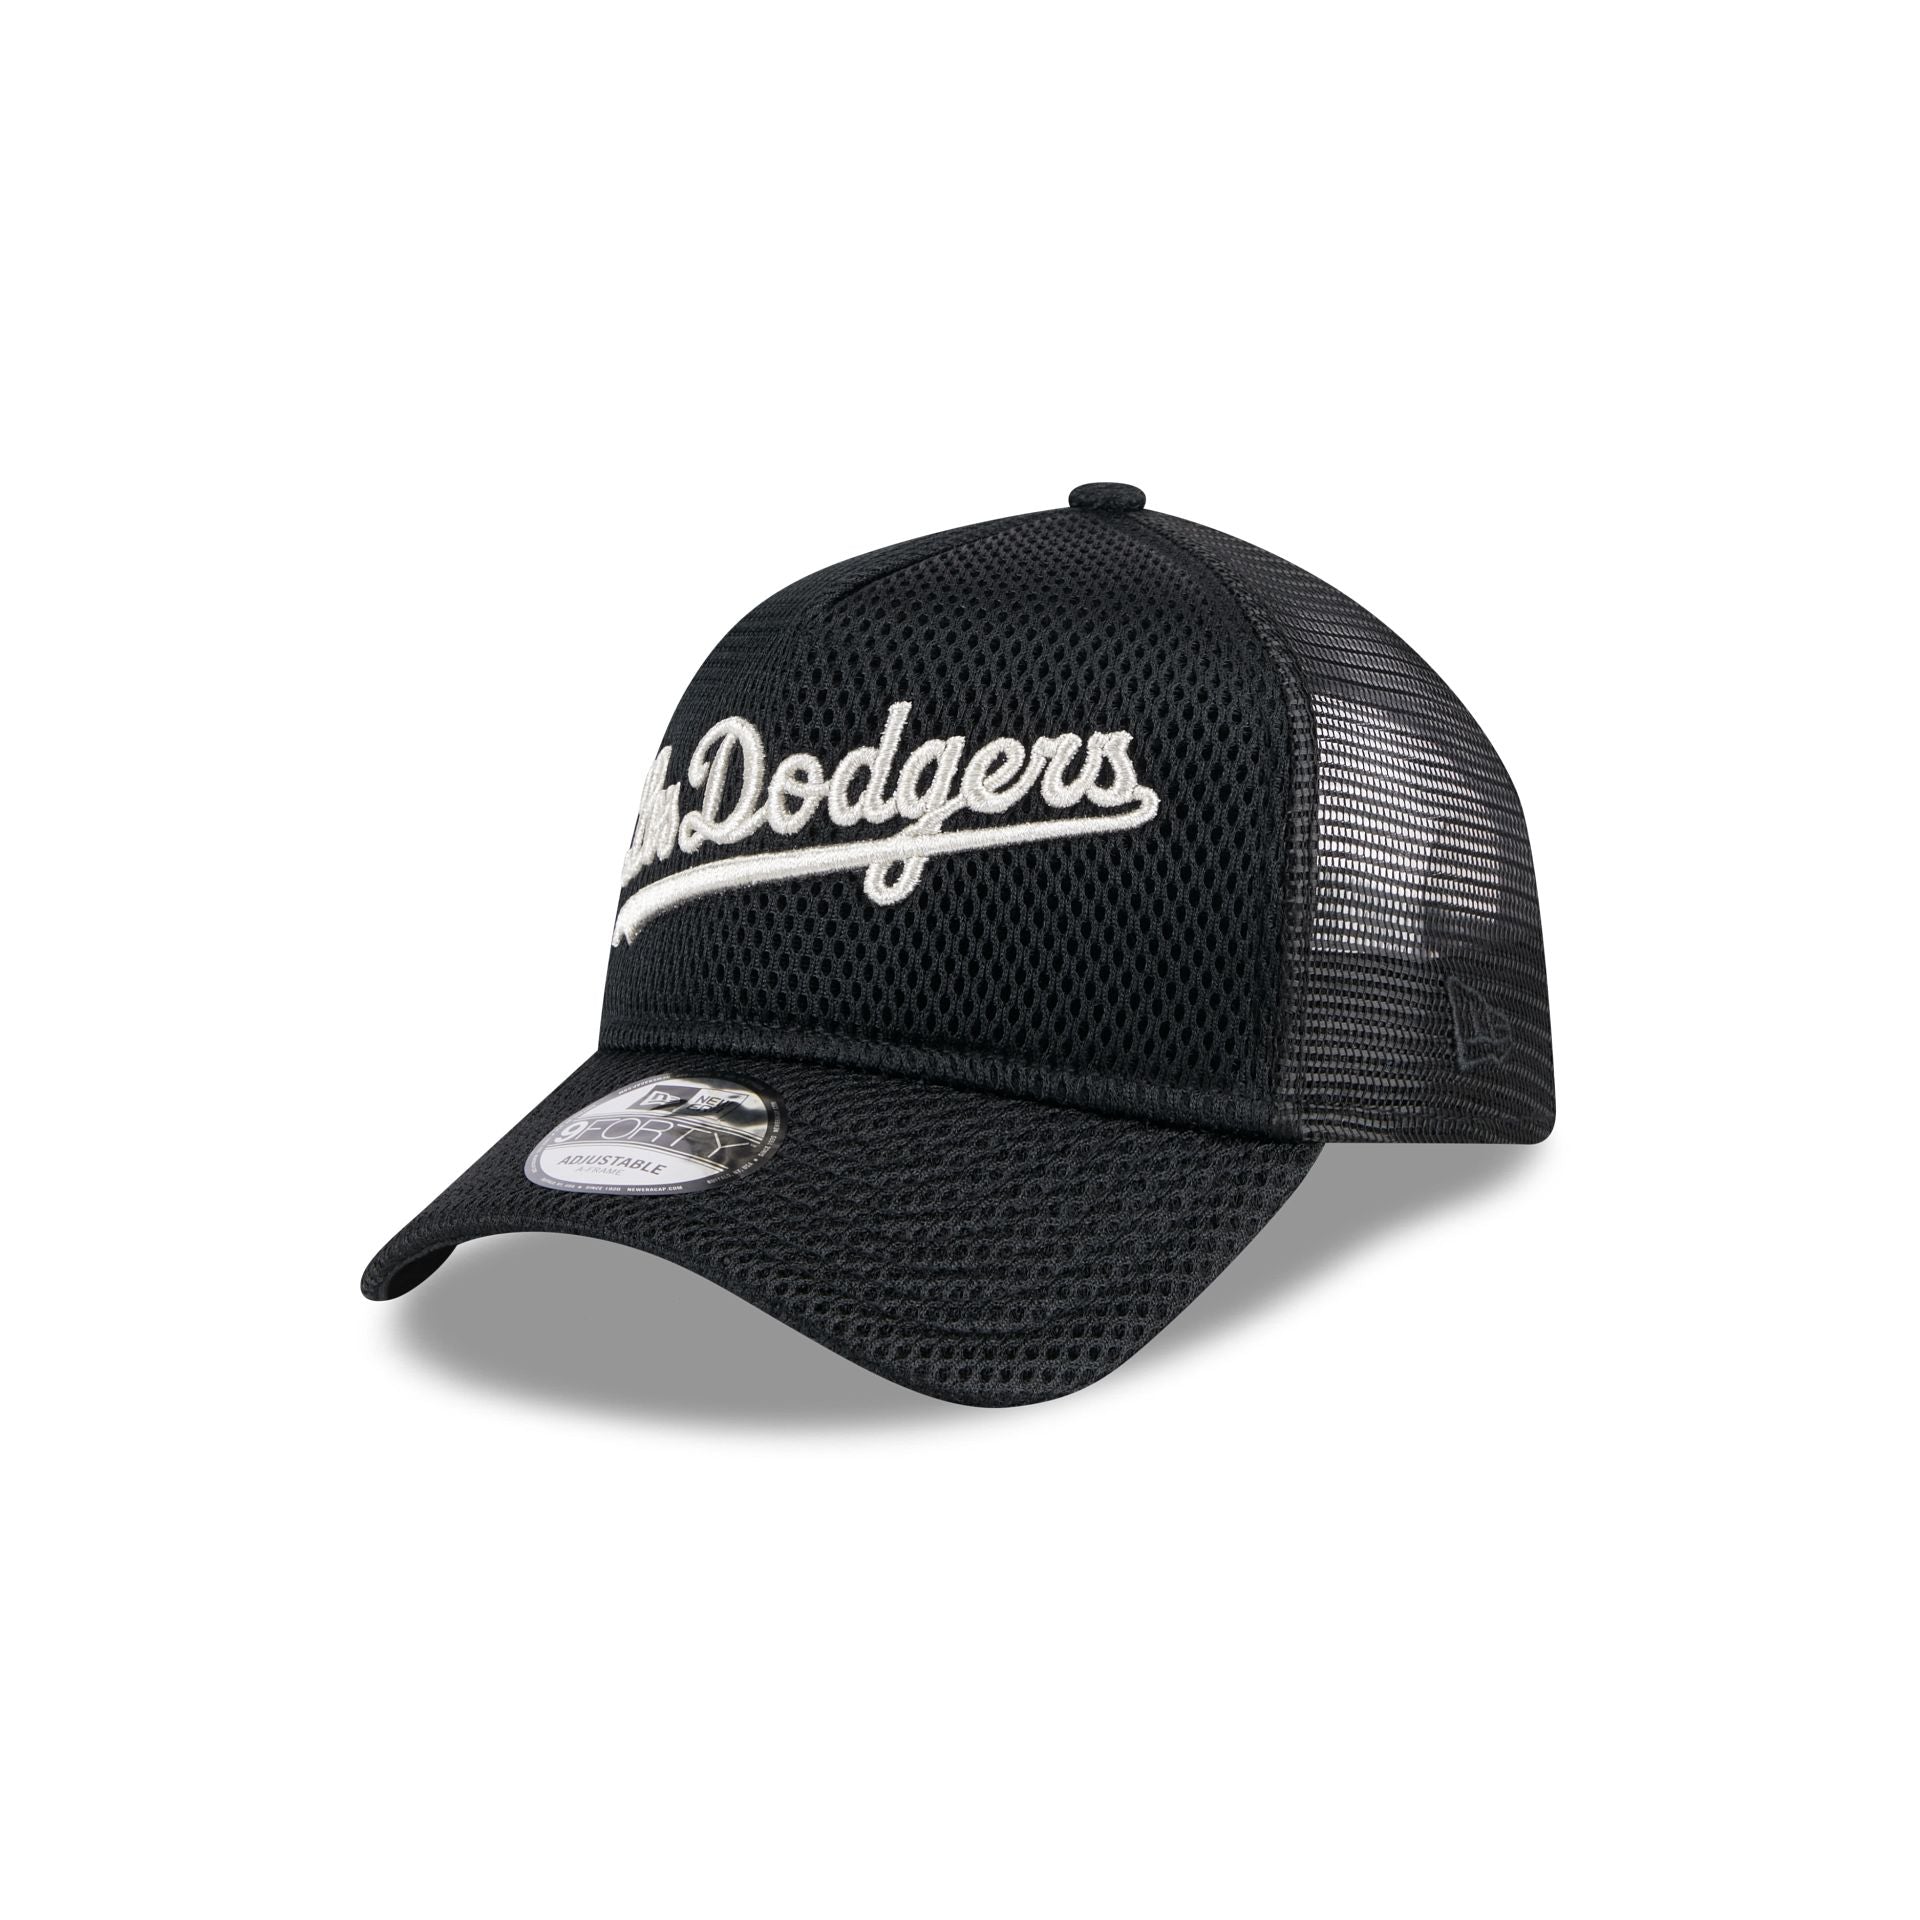 New Era - Los Angeles Dodgers - 9FORTY A-Frame Trucker Cap